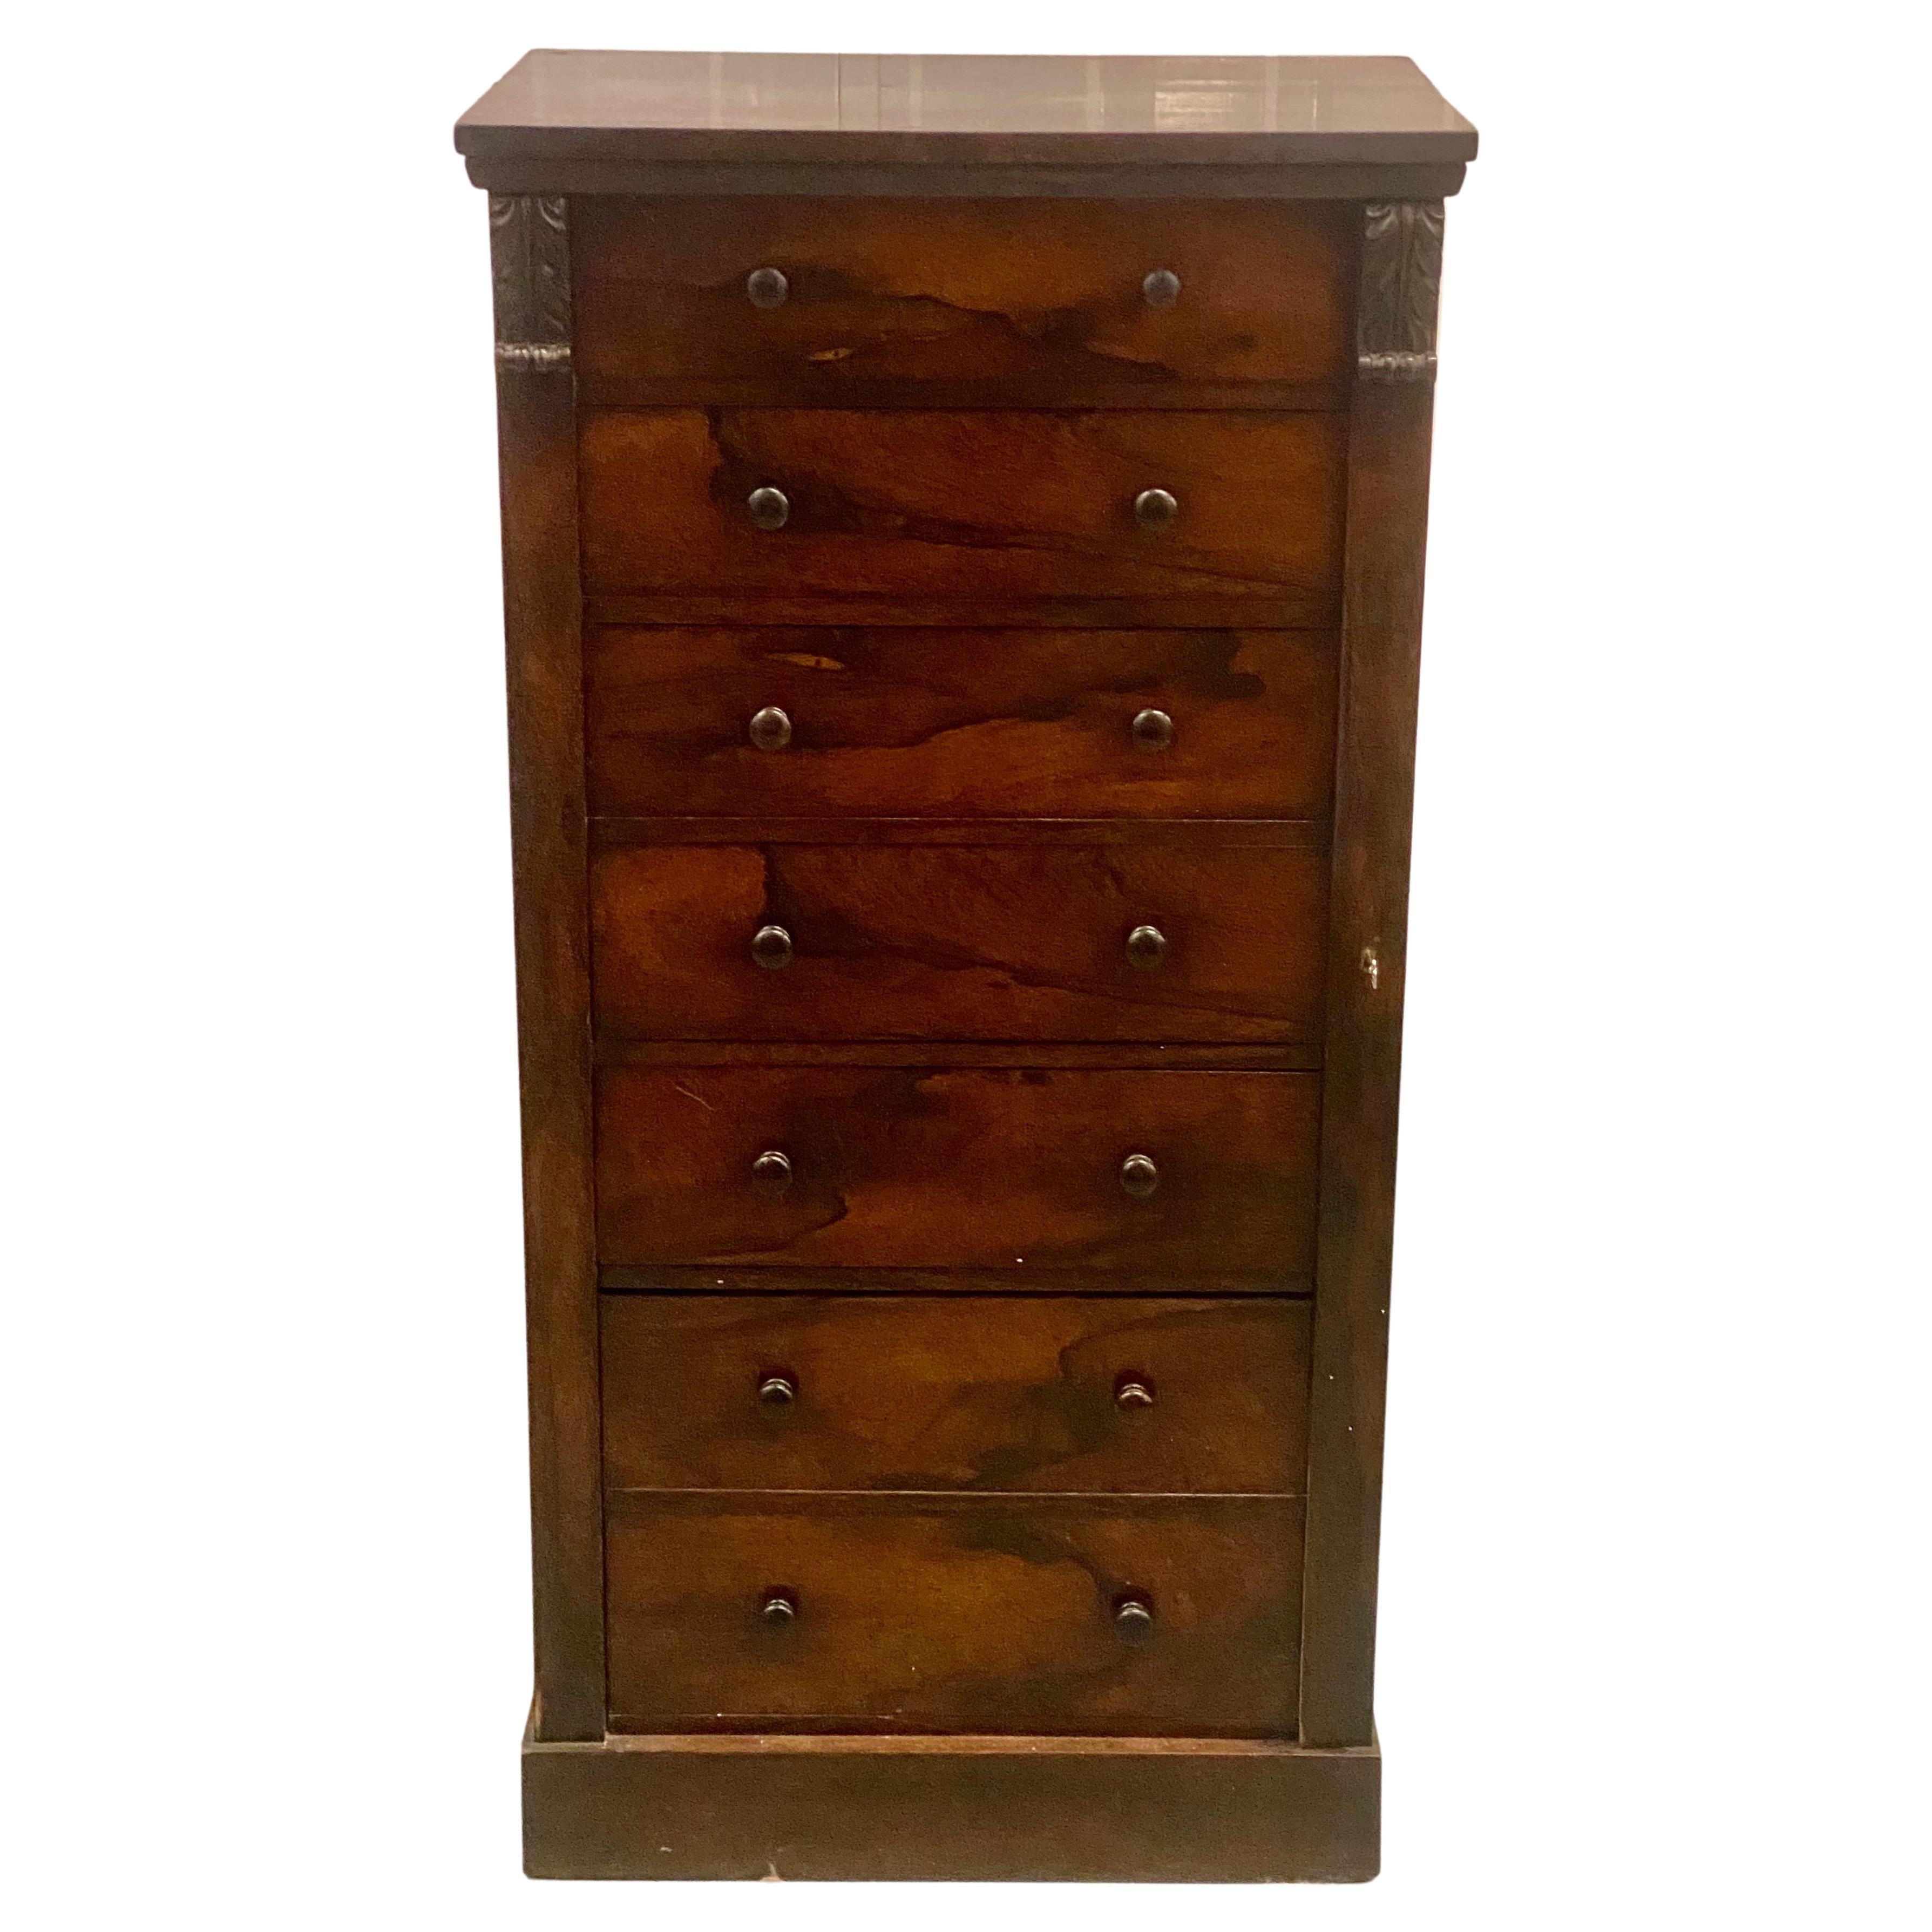 19th Century Rosewood Antique Wellington Chest of Drawers